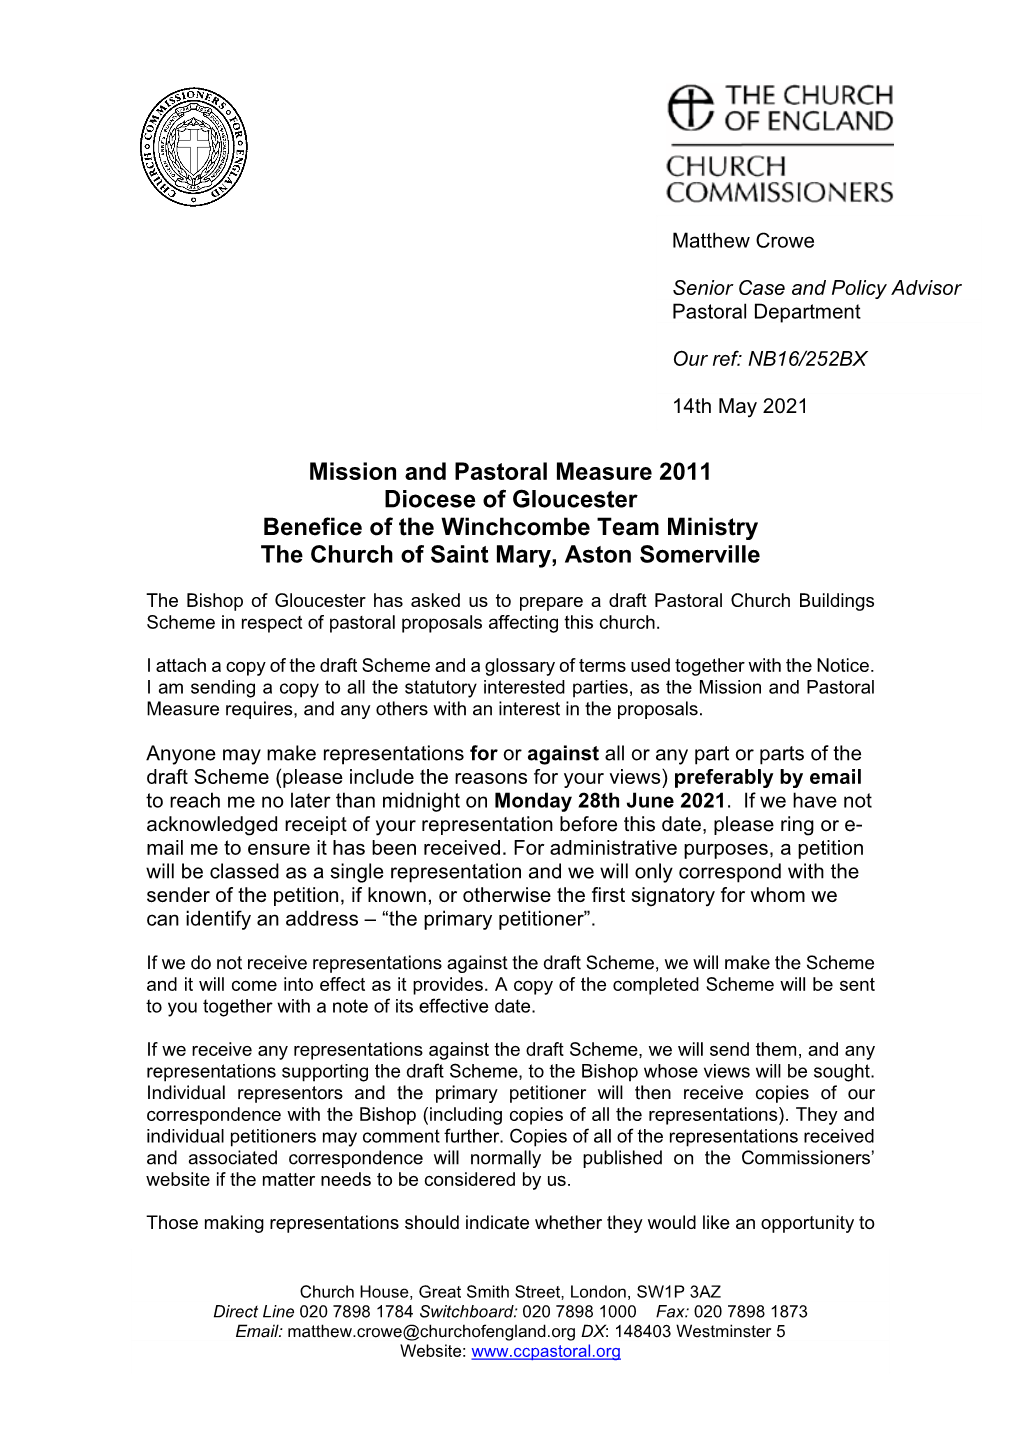 Mission and Pastoral Measure 2011 Diocese of Gloucester Benefice of the Winchcombe Team Ministry the Church of Saint Mary, Aston Somerville